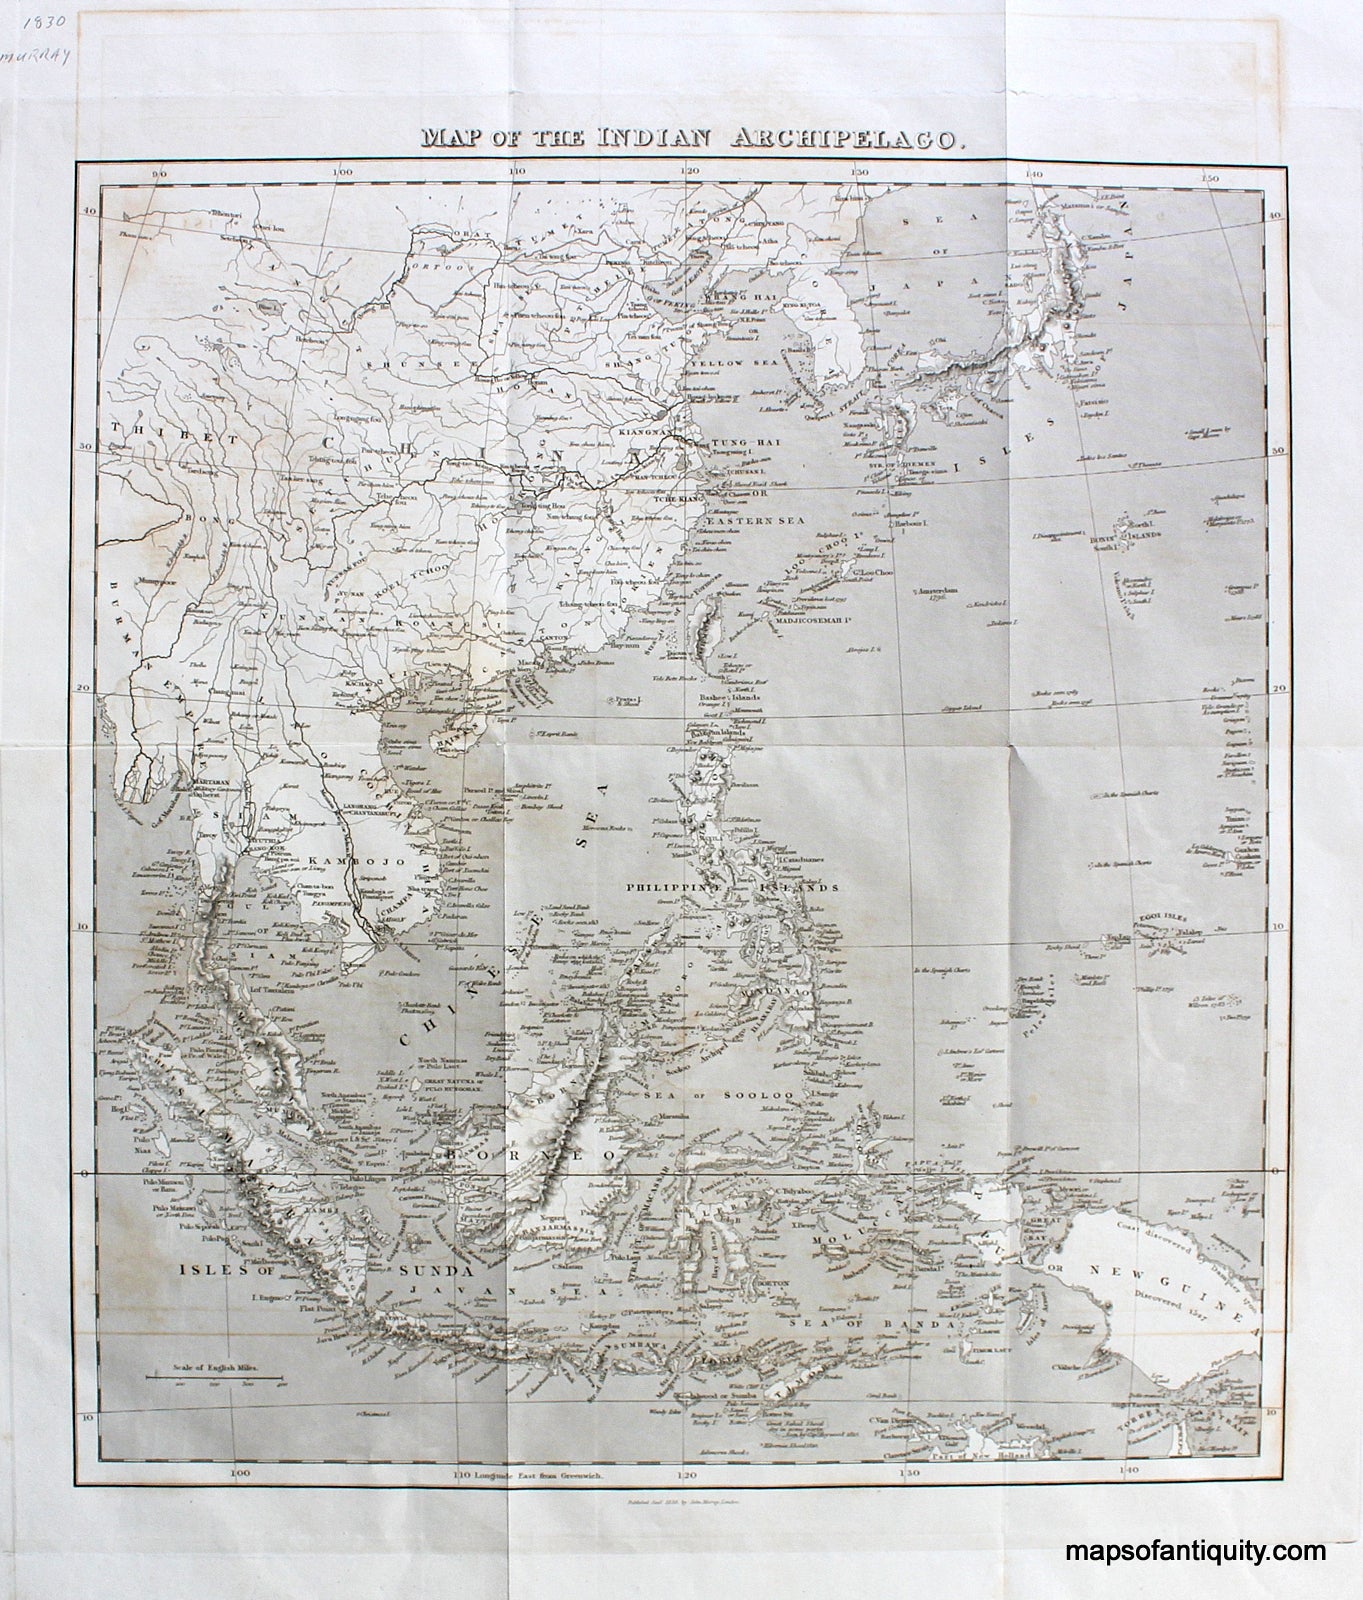 Black-and-White-Engraved-Antique-Map-Map-of-the-Indian-Archipelago.-**********-Asia-Southeast-Asia-and-Indonesia-1830-John-Murray-Maps-Of-Antiquity